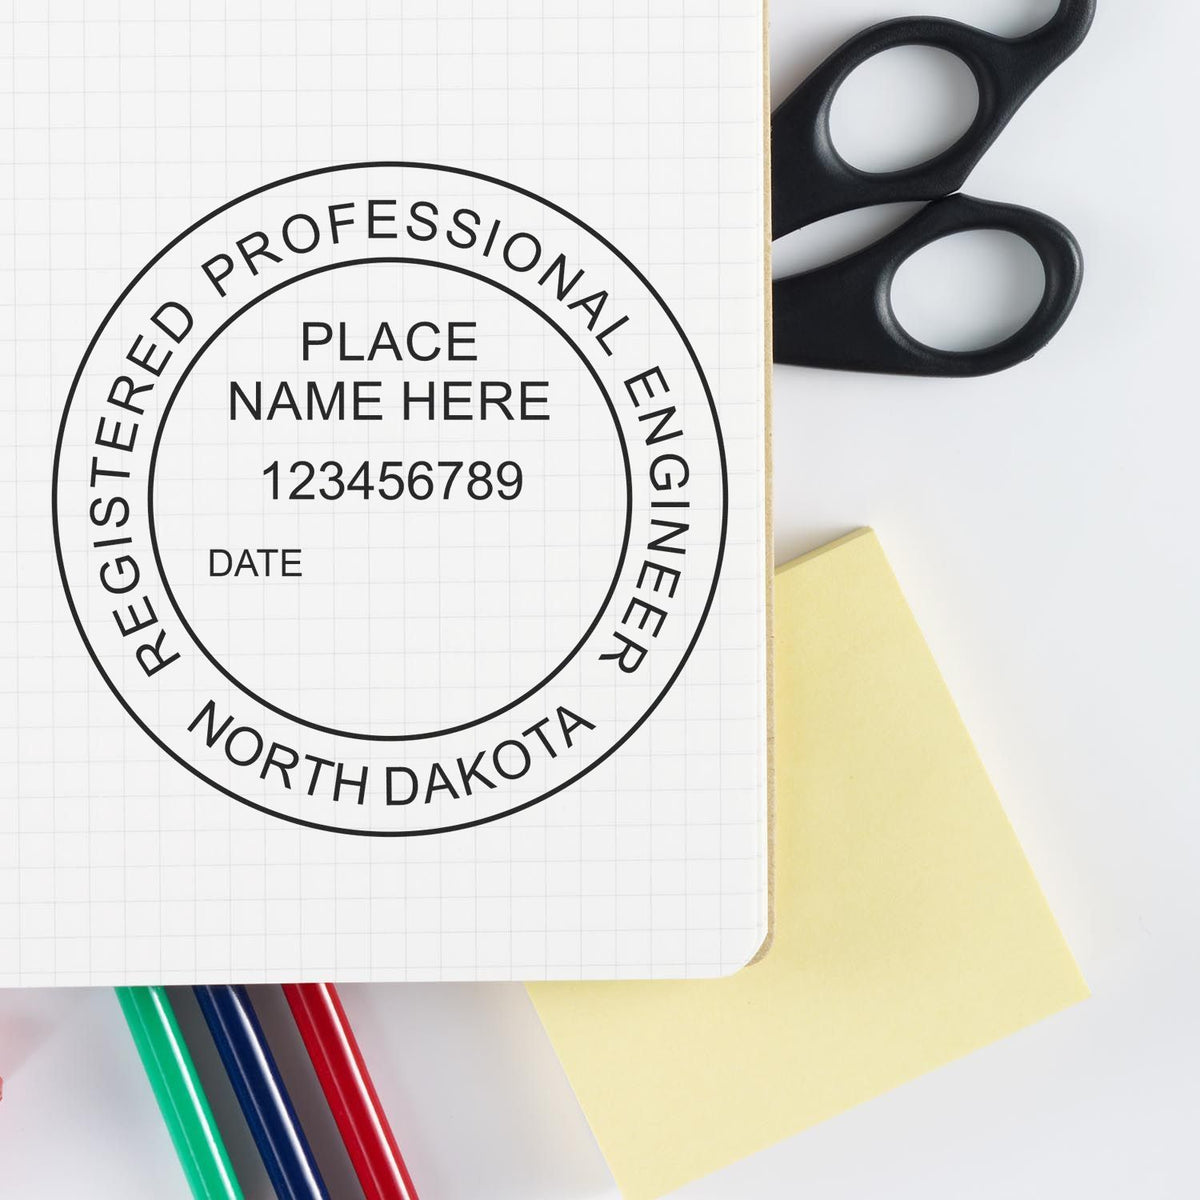 A stamped impression of the Slim Pre-Inked North Dakota Professional Engineer Seal Stamp in this stylish lifestyle photo, setting the tone for a unique and personalized product.